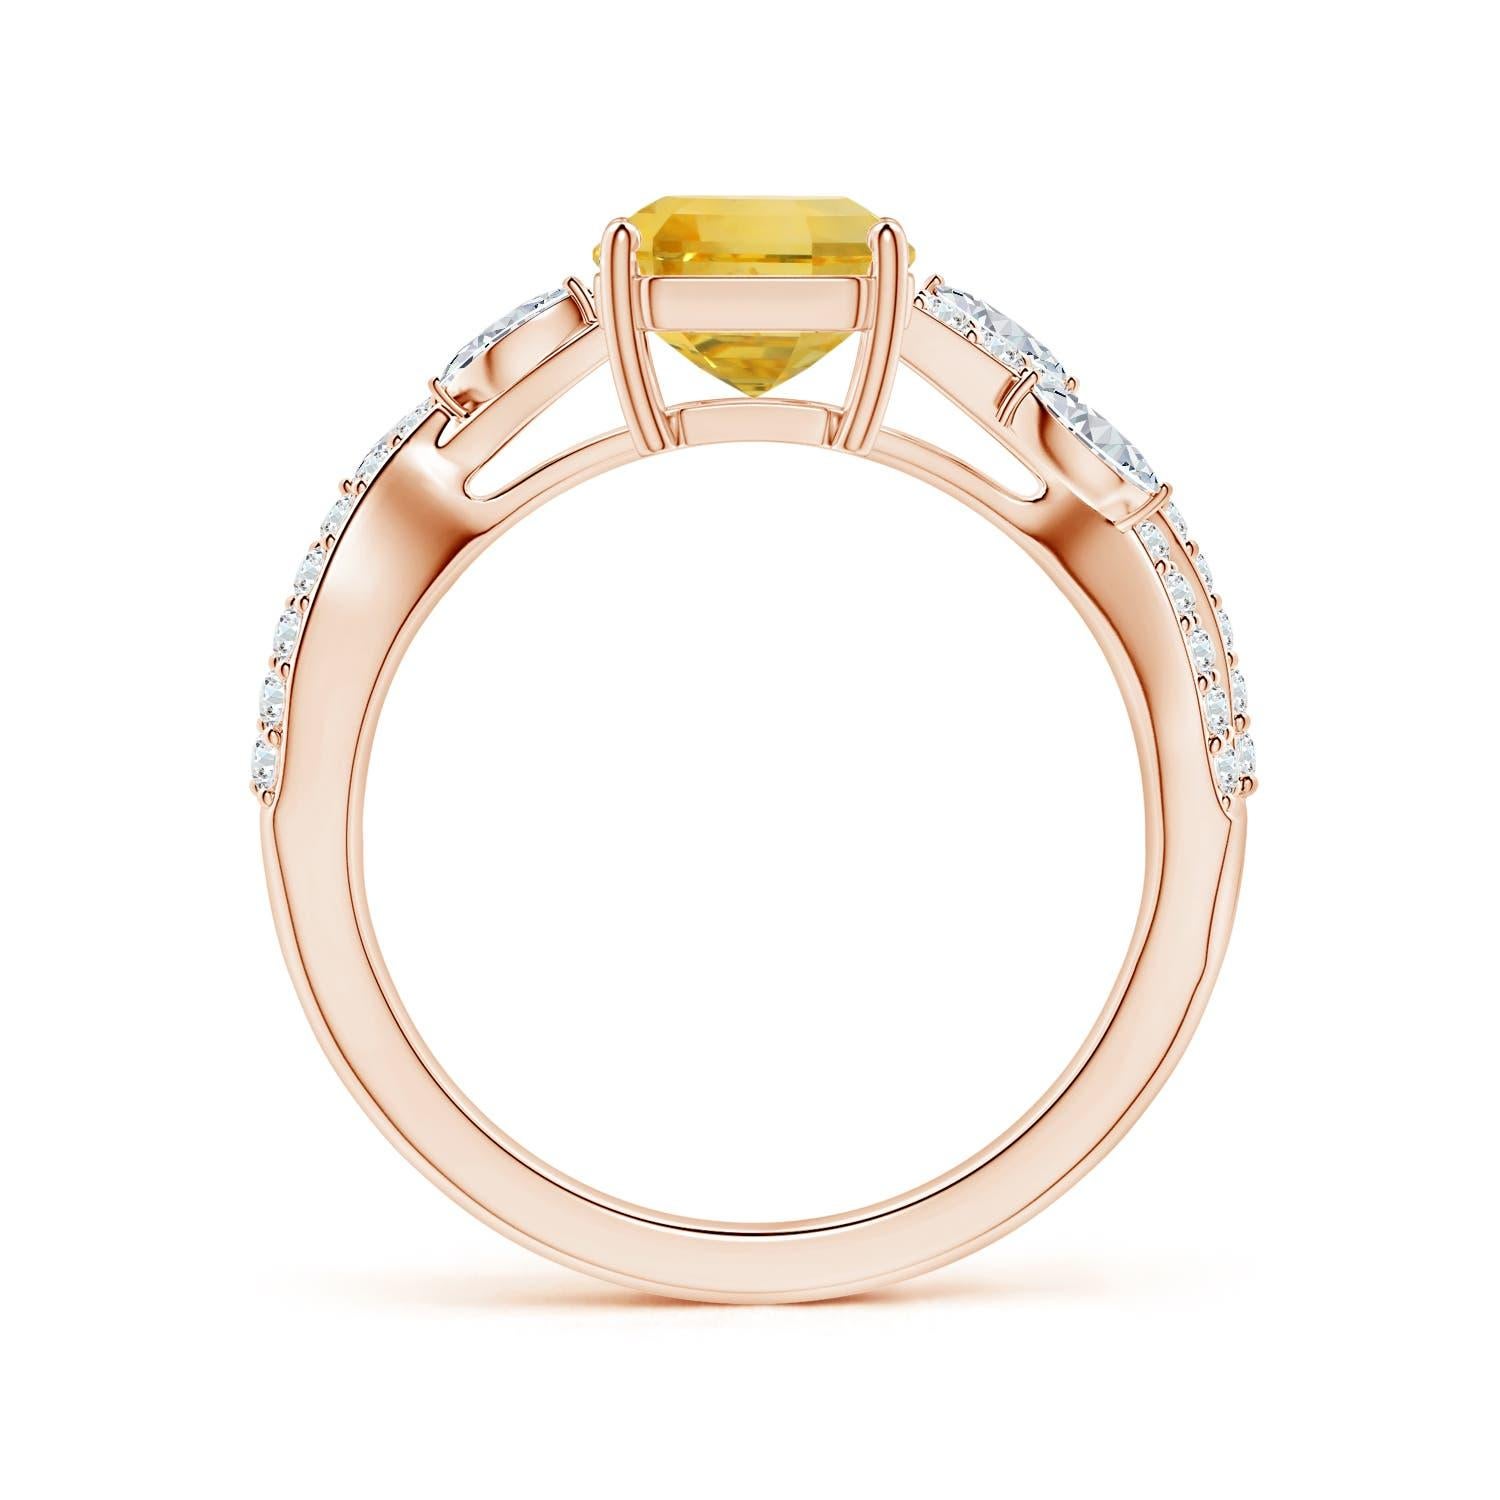 For Sale:  Angara GIA Certified Emerald-Cut Yellow Sapphire Ring in Rose Gold with Diamonds 2